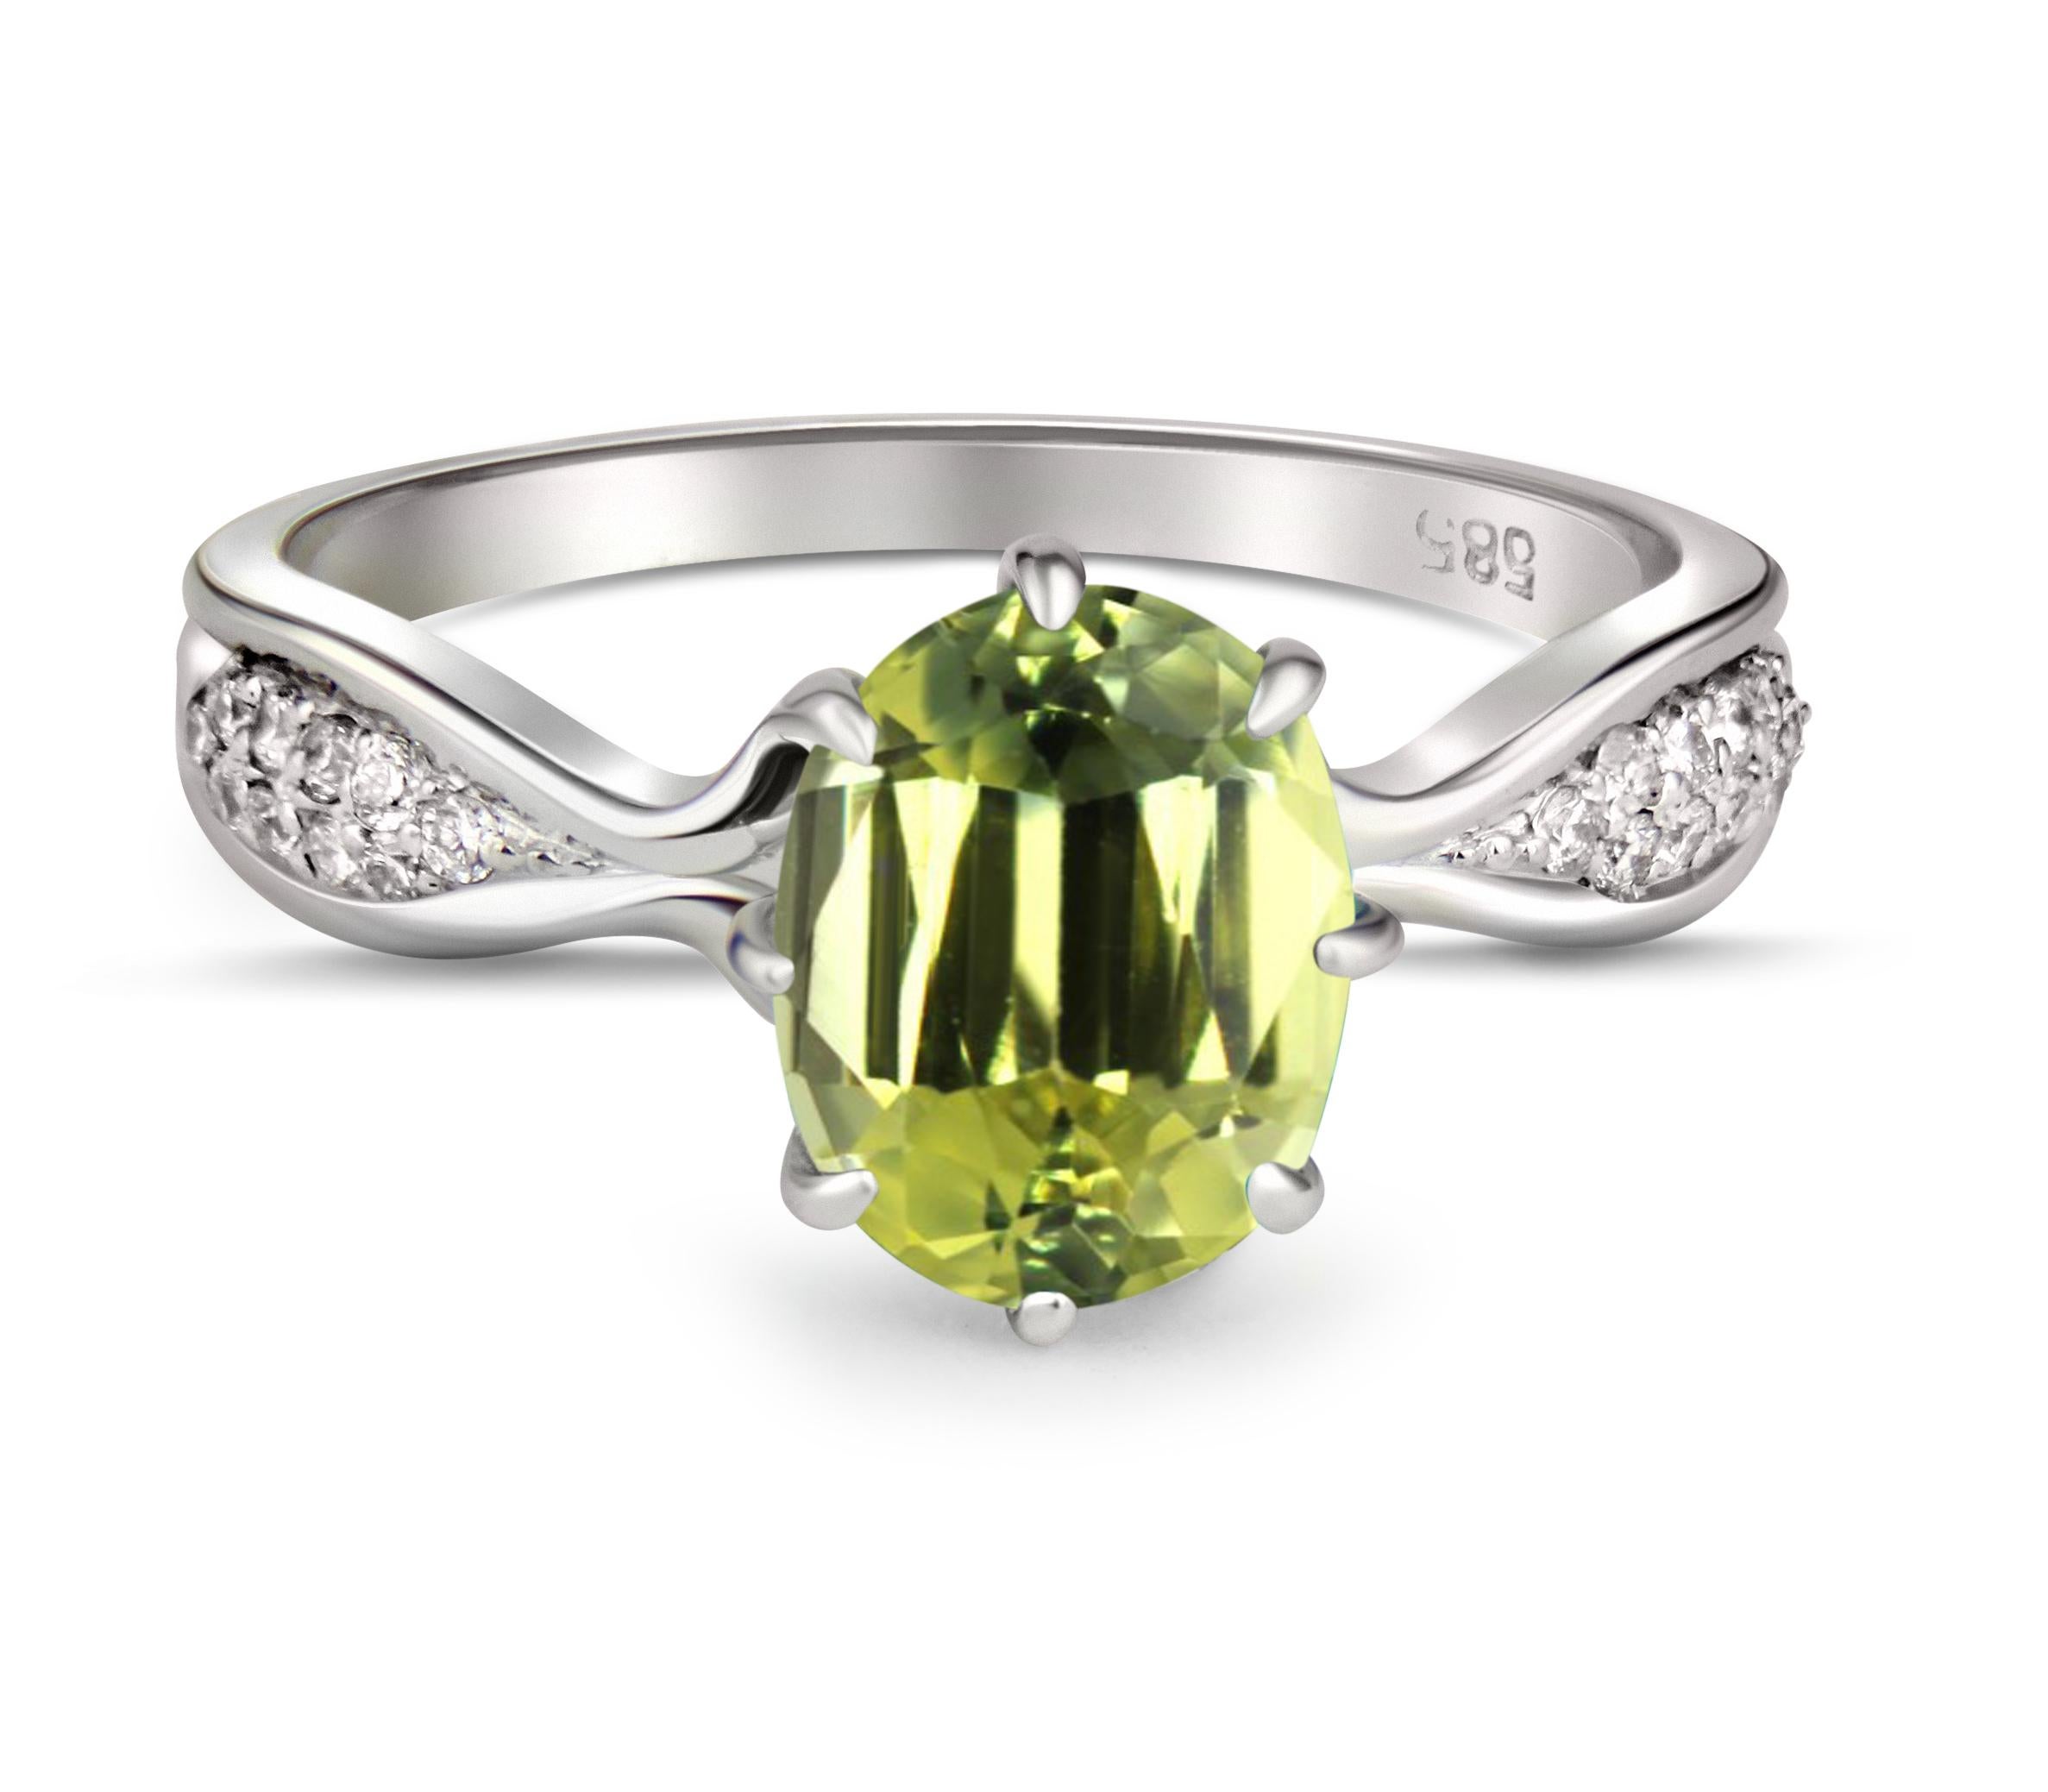 Peridot 14k gold ring. Oval Peridot ring. Peridot gold ring. Peridot vintage ring. Peridot engagement ring. August birthstone ring. Green gem ring. Peridot gold jewelry. 
 
Metal: 14k solid gold
Weight: 2.1 g (depends from size)
Main stone -